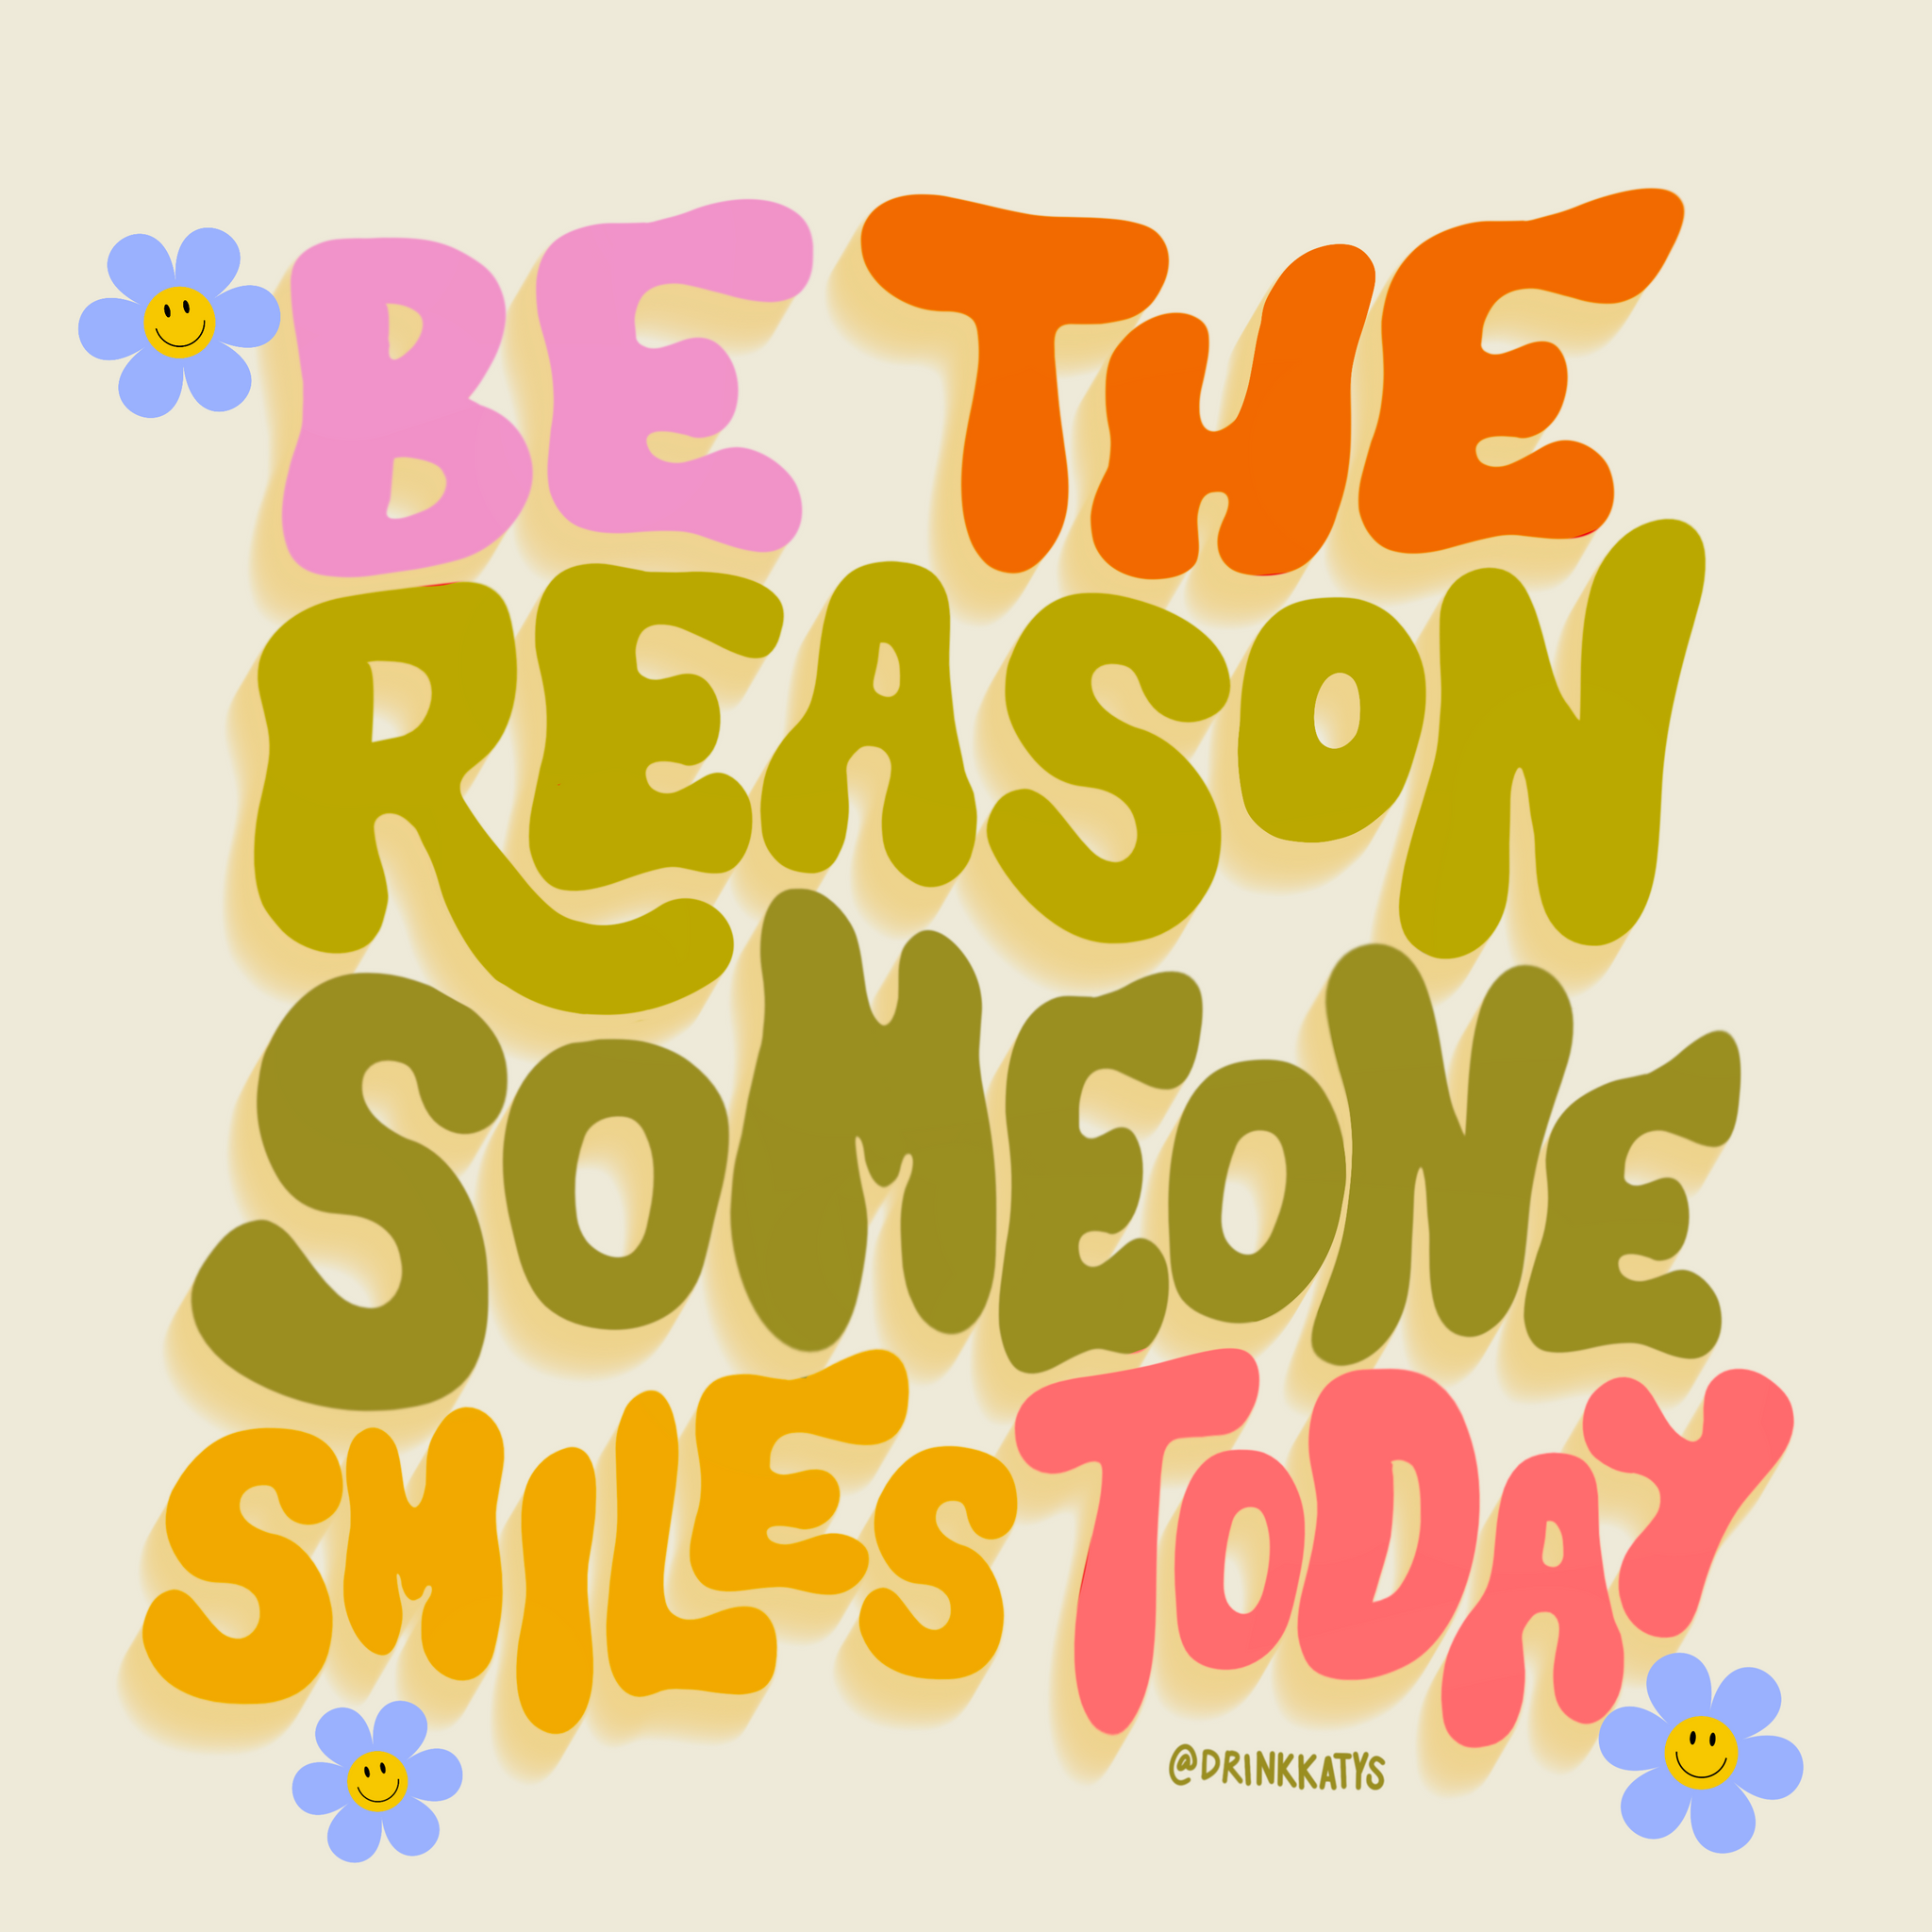 20 Simple Ways to Make Someone Smile Today